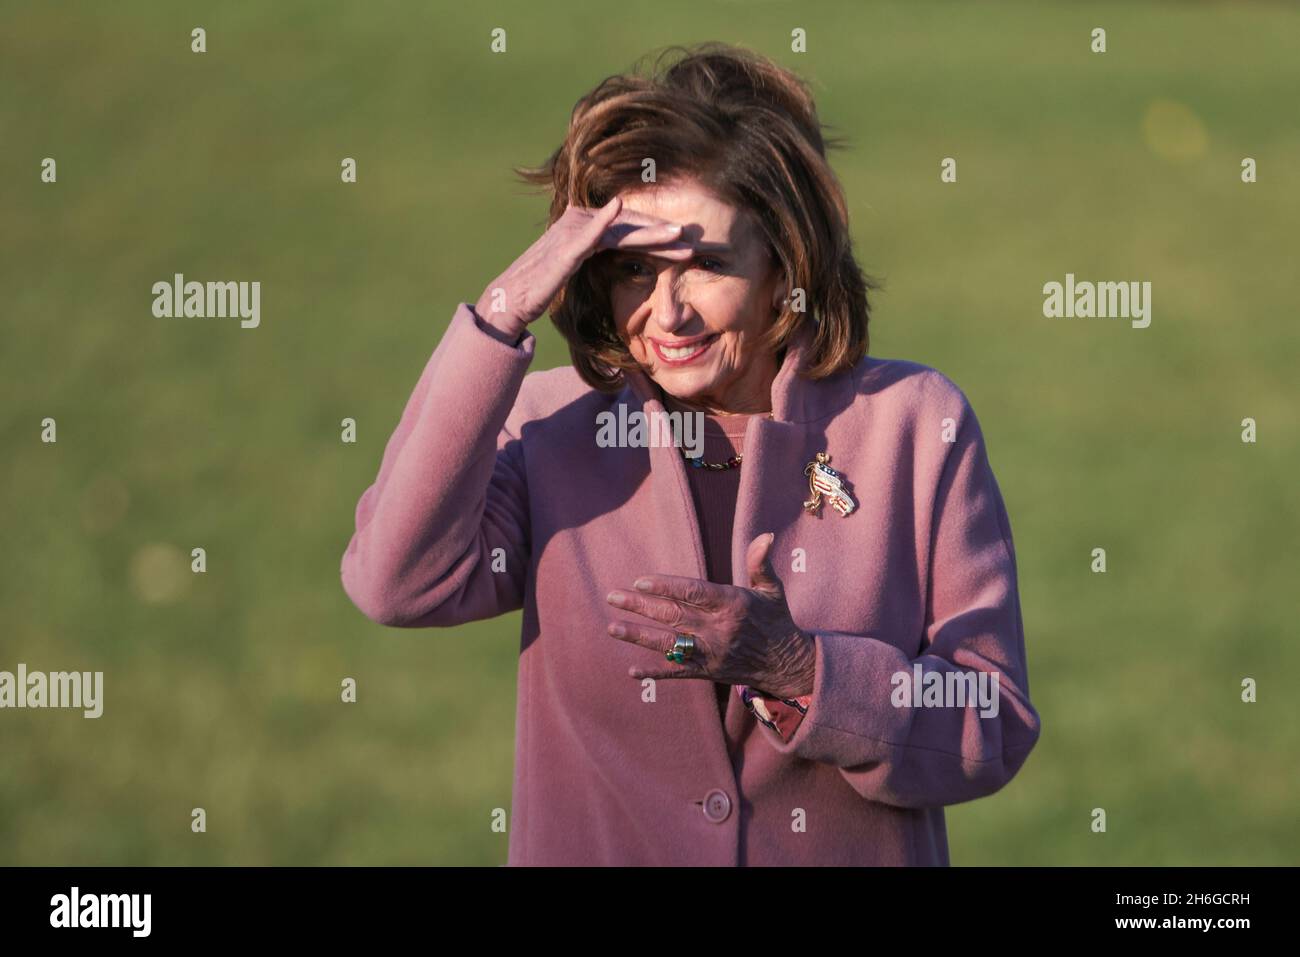 Washington, USA. 15th Nov, 2021. Speaker of The House Nancy Pelosi speaks before a ceremony where President Joe Biden will sign into law his Bipartisan Infrastructure Deal, H.R. 3684, the Infrastructure Investment and Jobs Act on the South Lawn of the White House on November 15, 2021 in Washington, DC. (Photo by Oliver Contreras/Sipa USA) Credit: Sipa USA/Alamy Live News Stock Photo